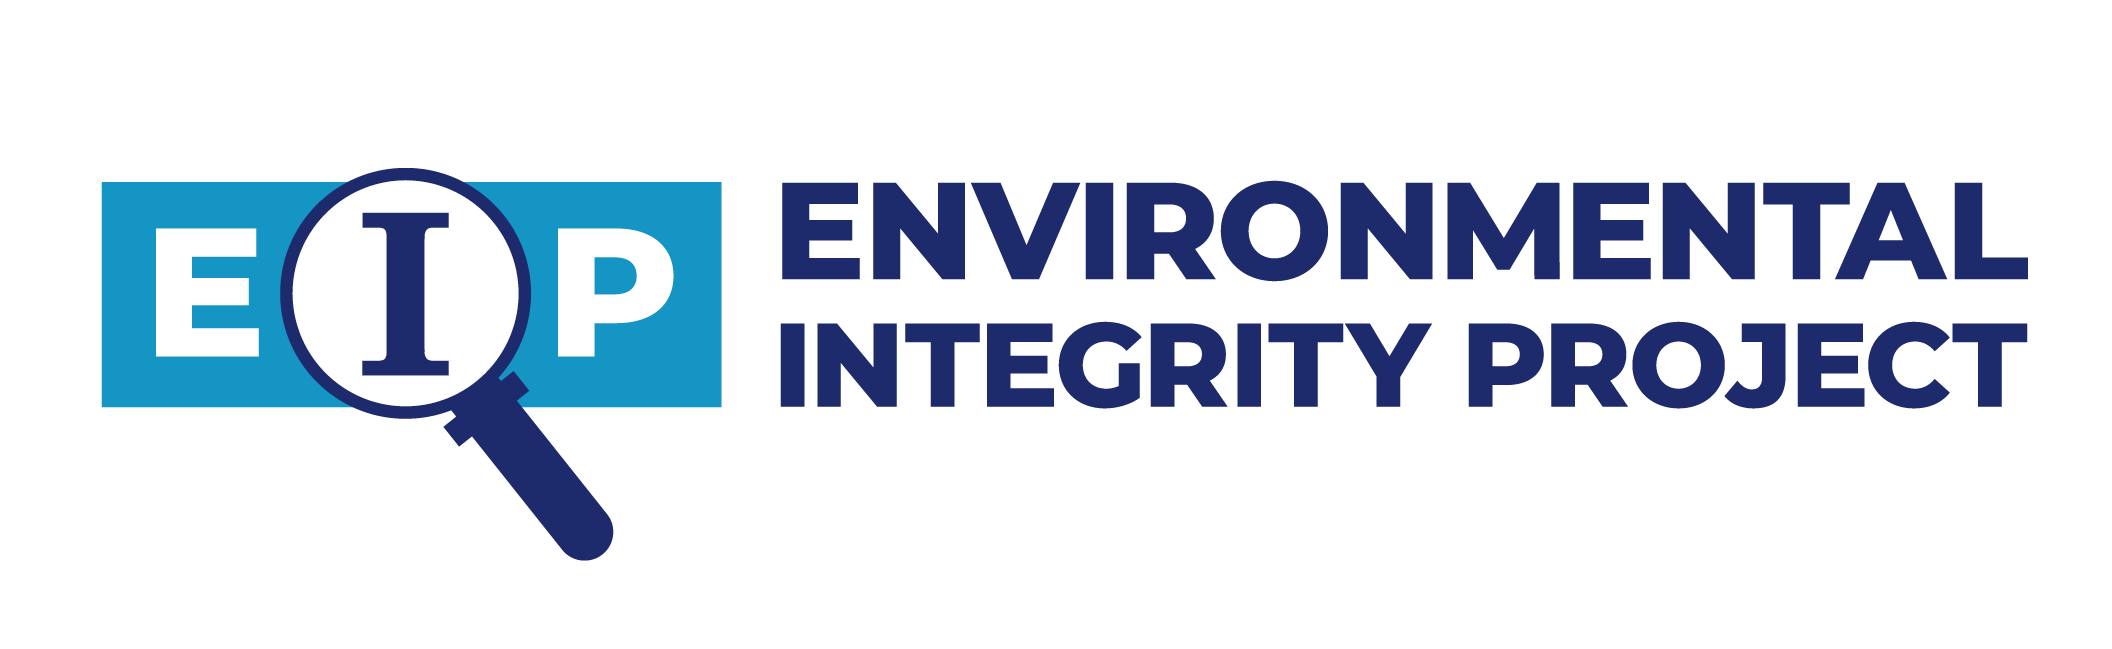 Environmental Integrity » EIP Commenting on Supplemental Permit Amendments for Motiva's Port Arthur Texas Refinery Expansion